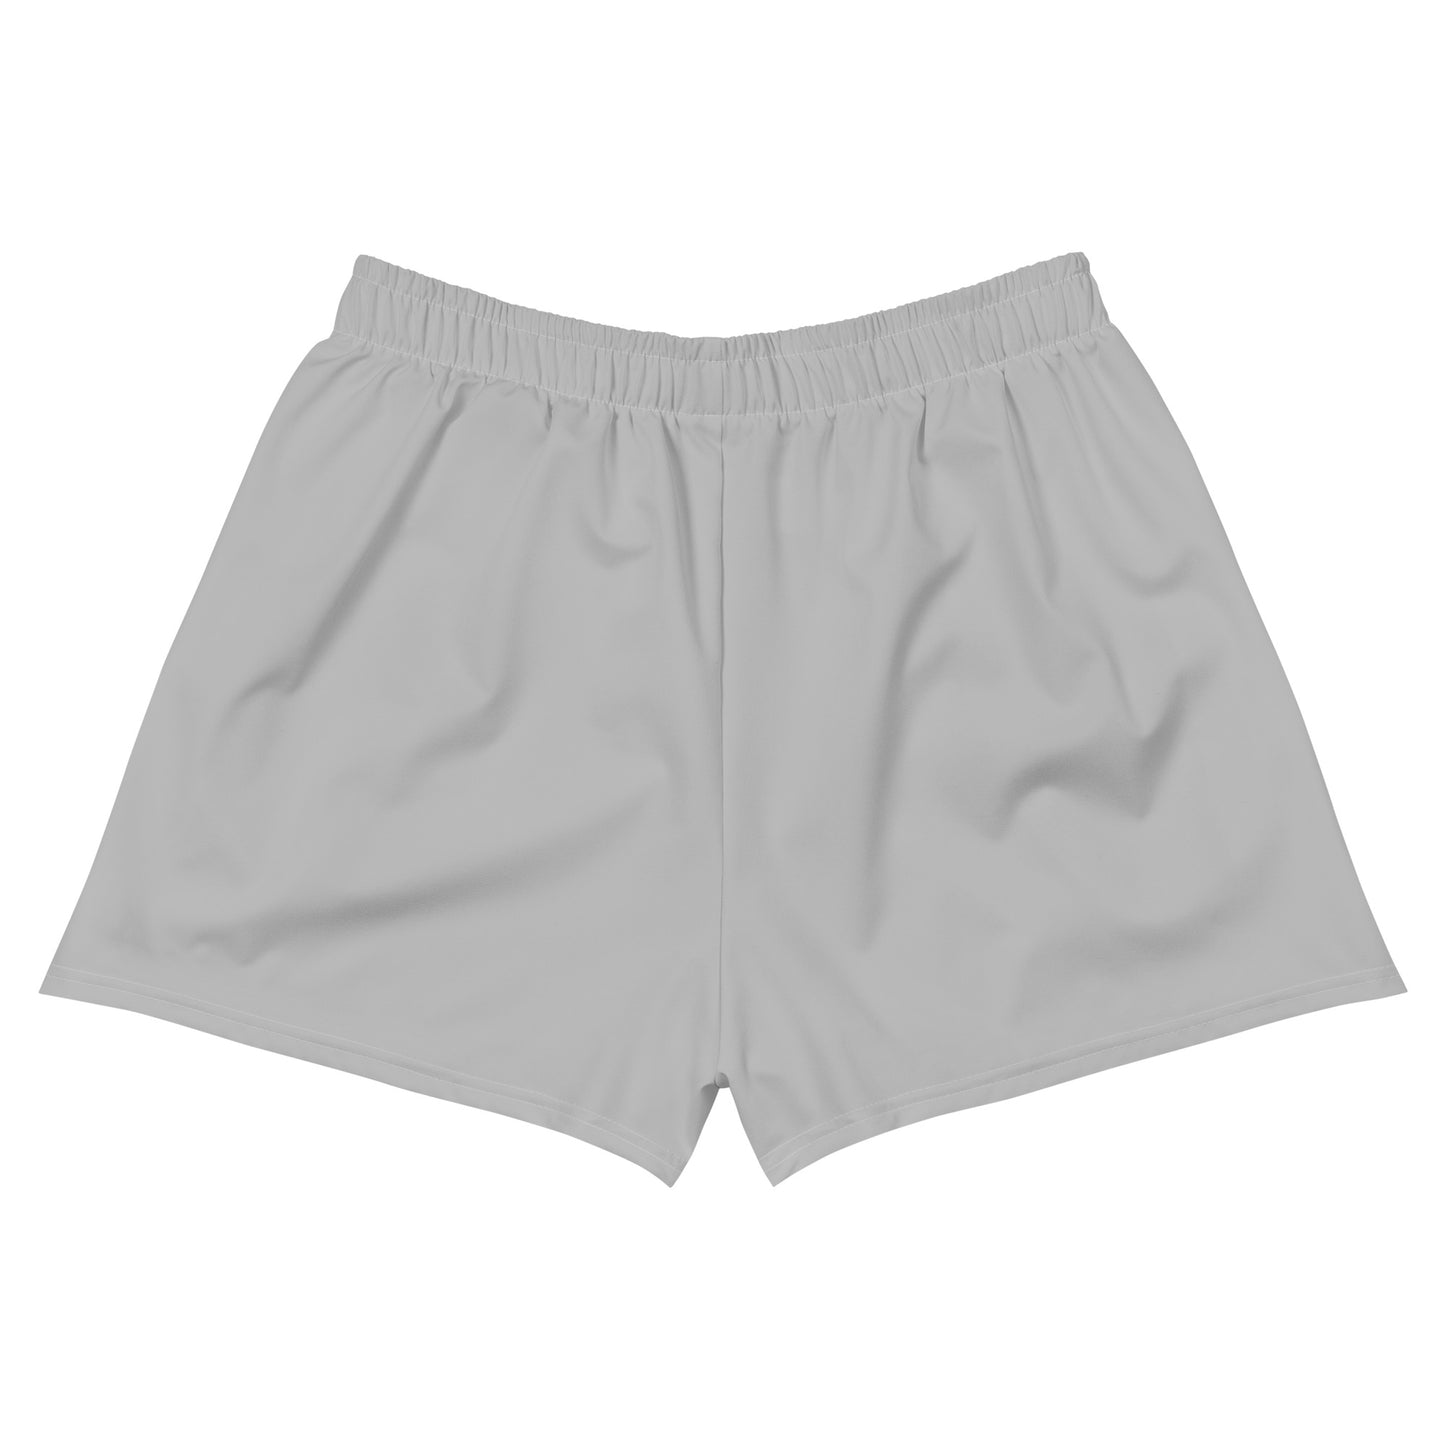 Silver Athletic Shorts